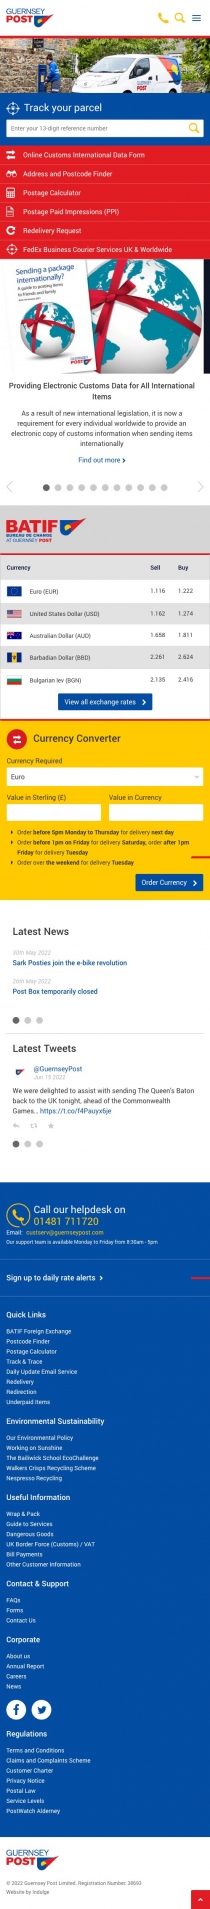 Guernsey Post website homepage screenshot on mobile device